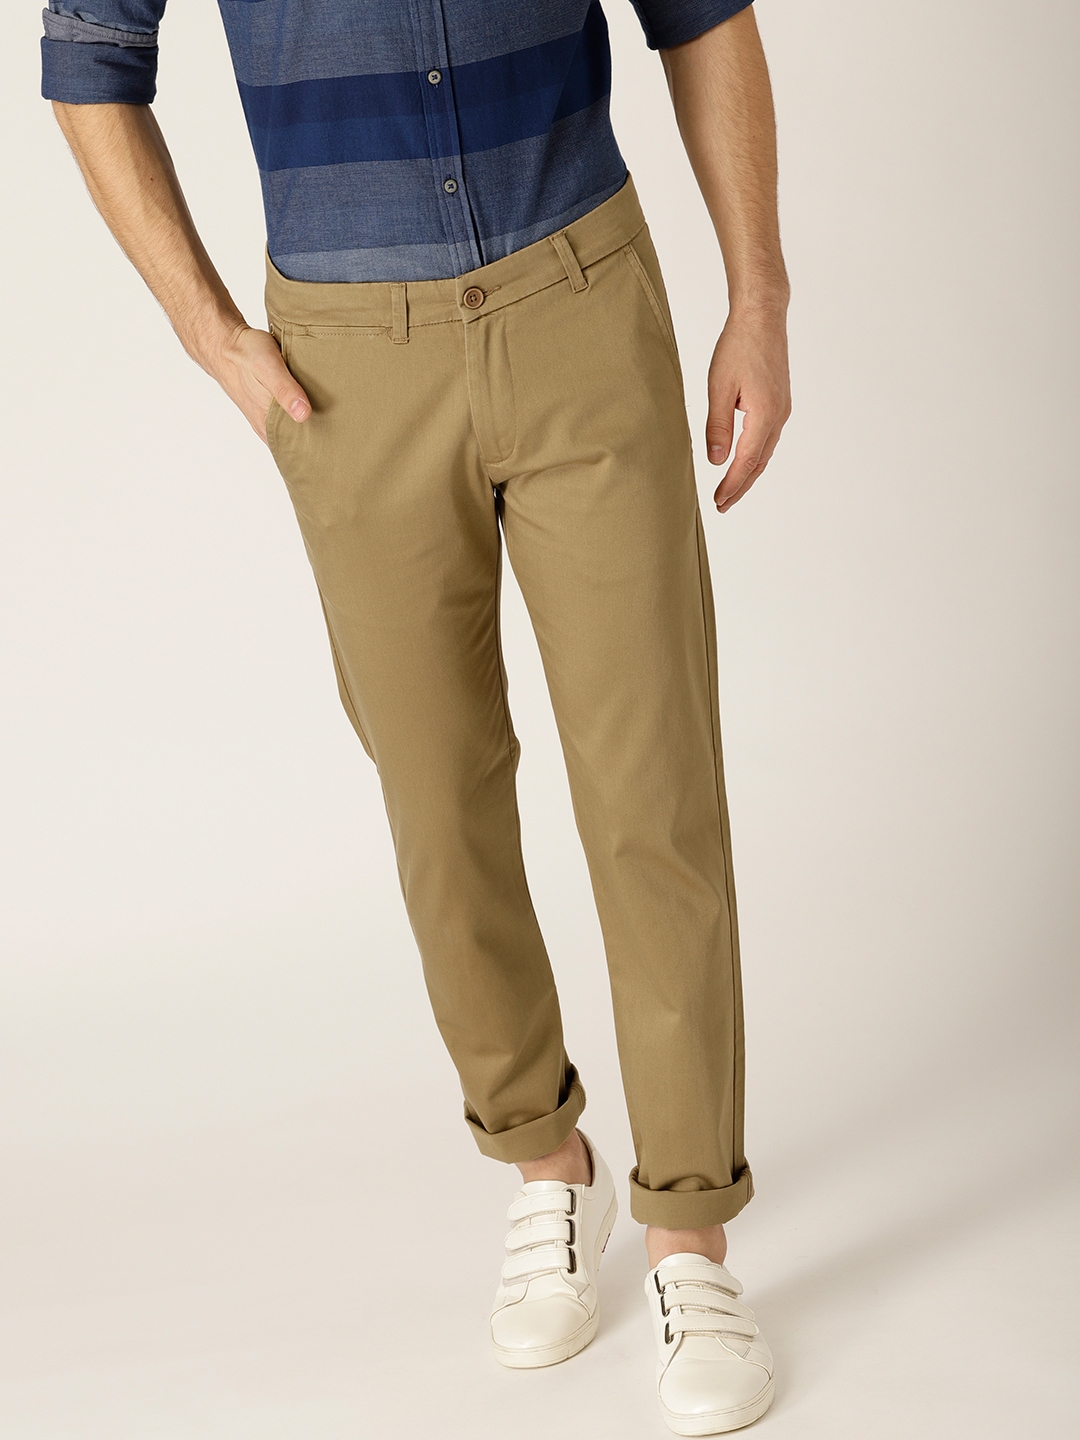 Buy United Colors Of Benetton Men Khaki Slim Fit Solid Chinos ...